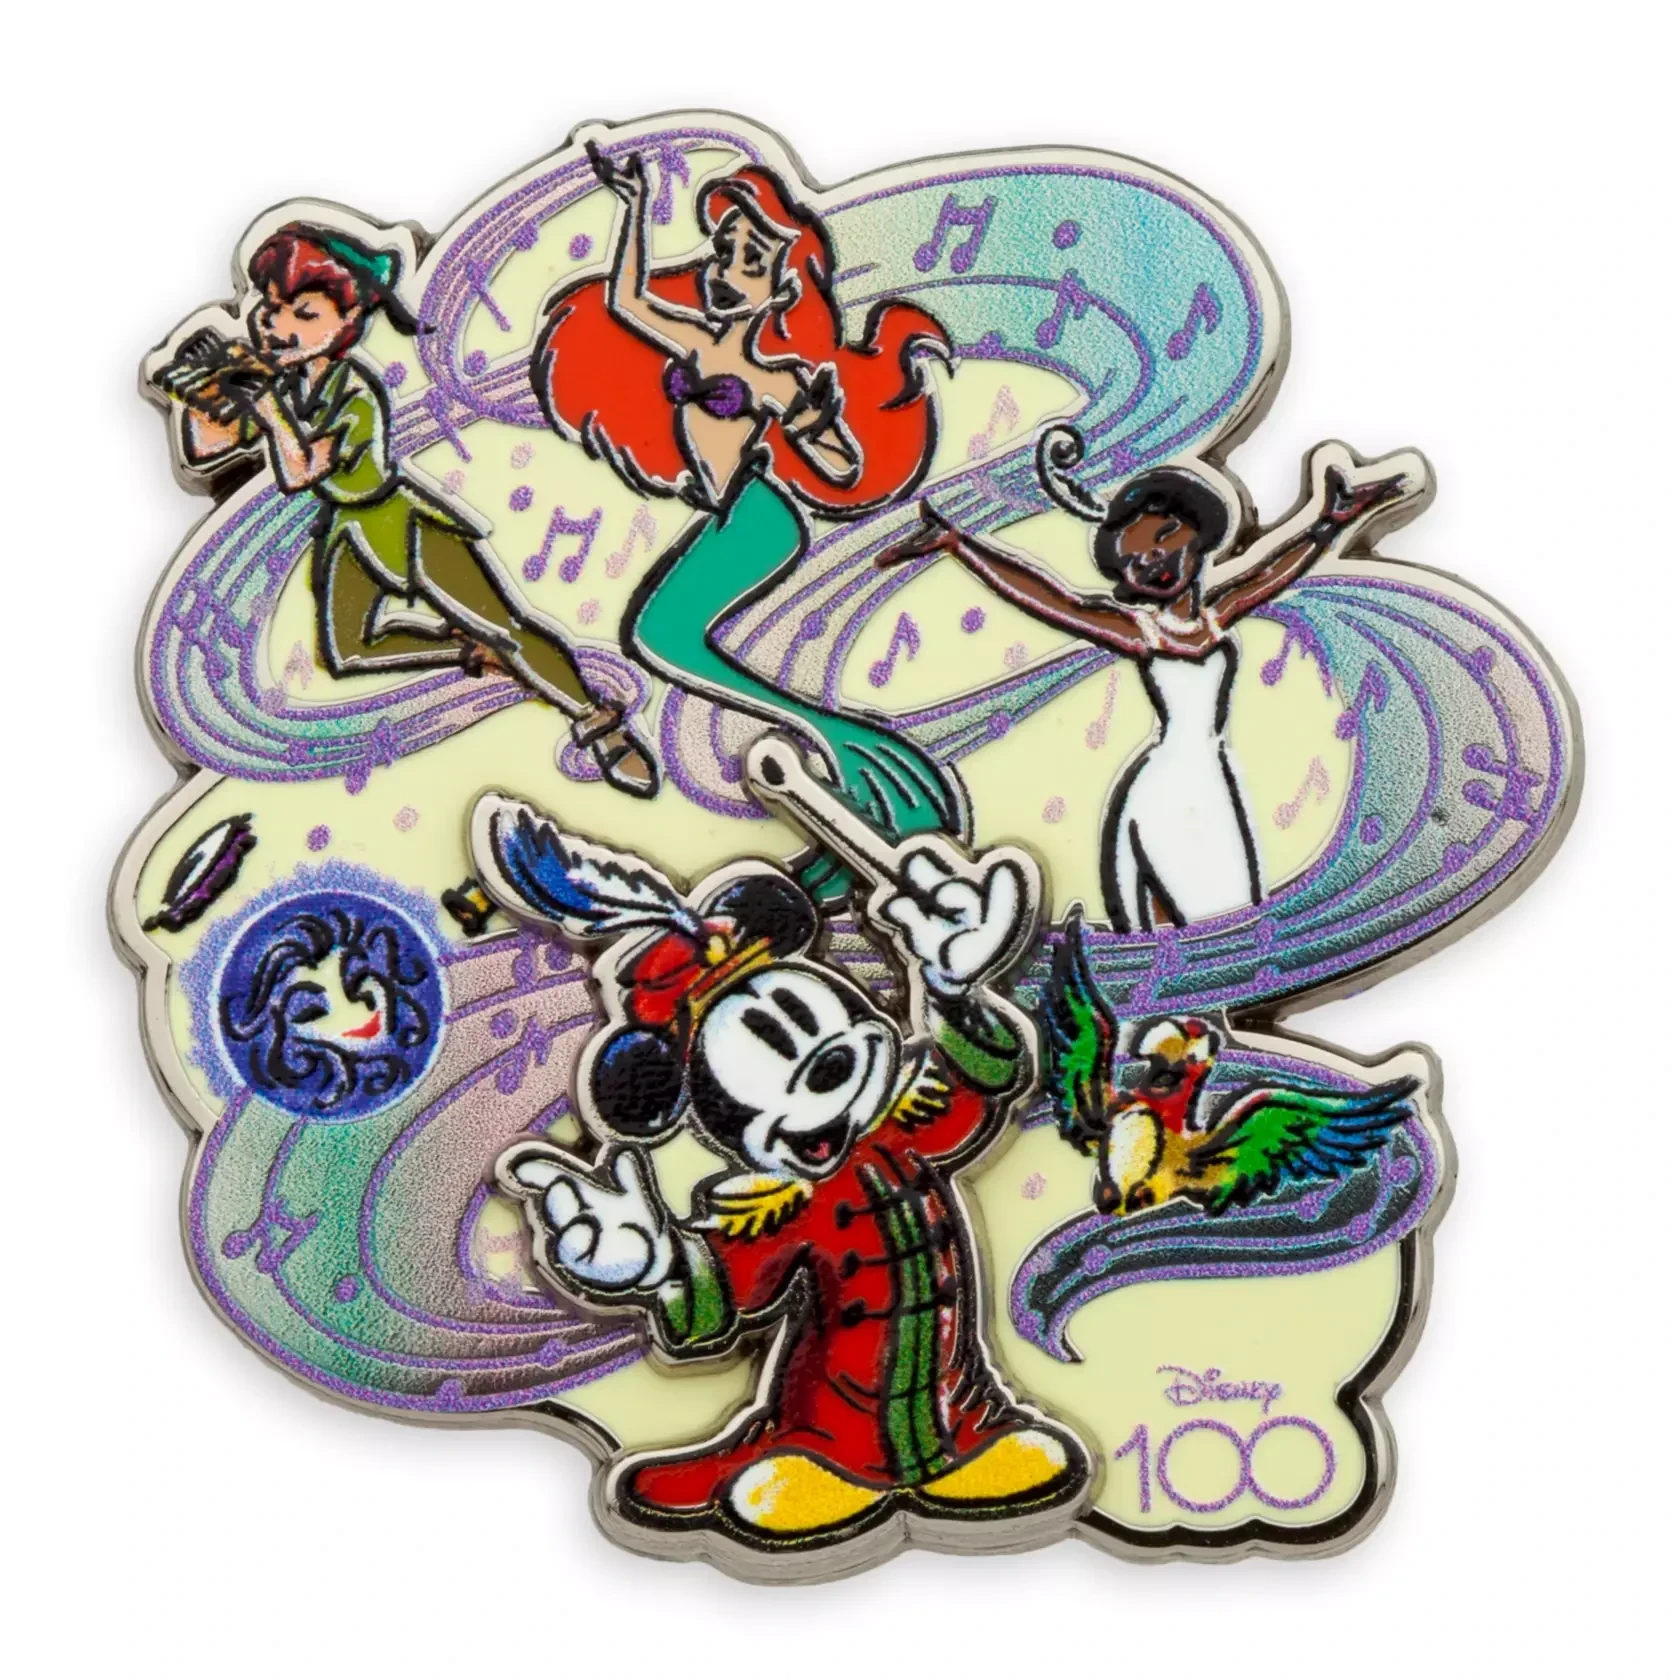 item Disney Parks - Mickey Mouse, Ariel and Friends - Disney100 Special Moments - Limited Release 3801059610054fmtwebpqlt70wid1680h